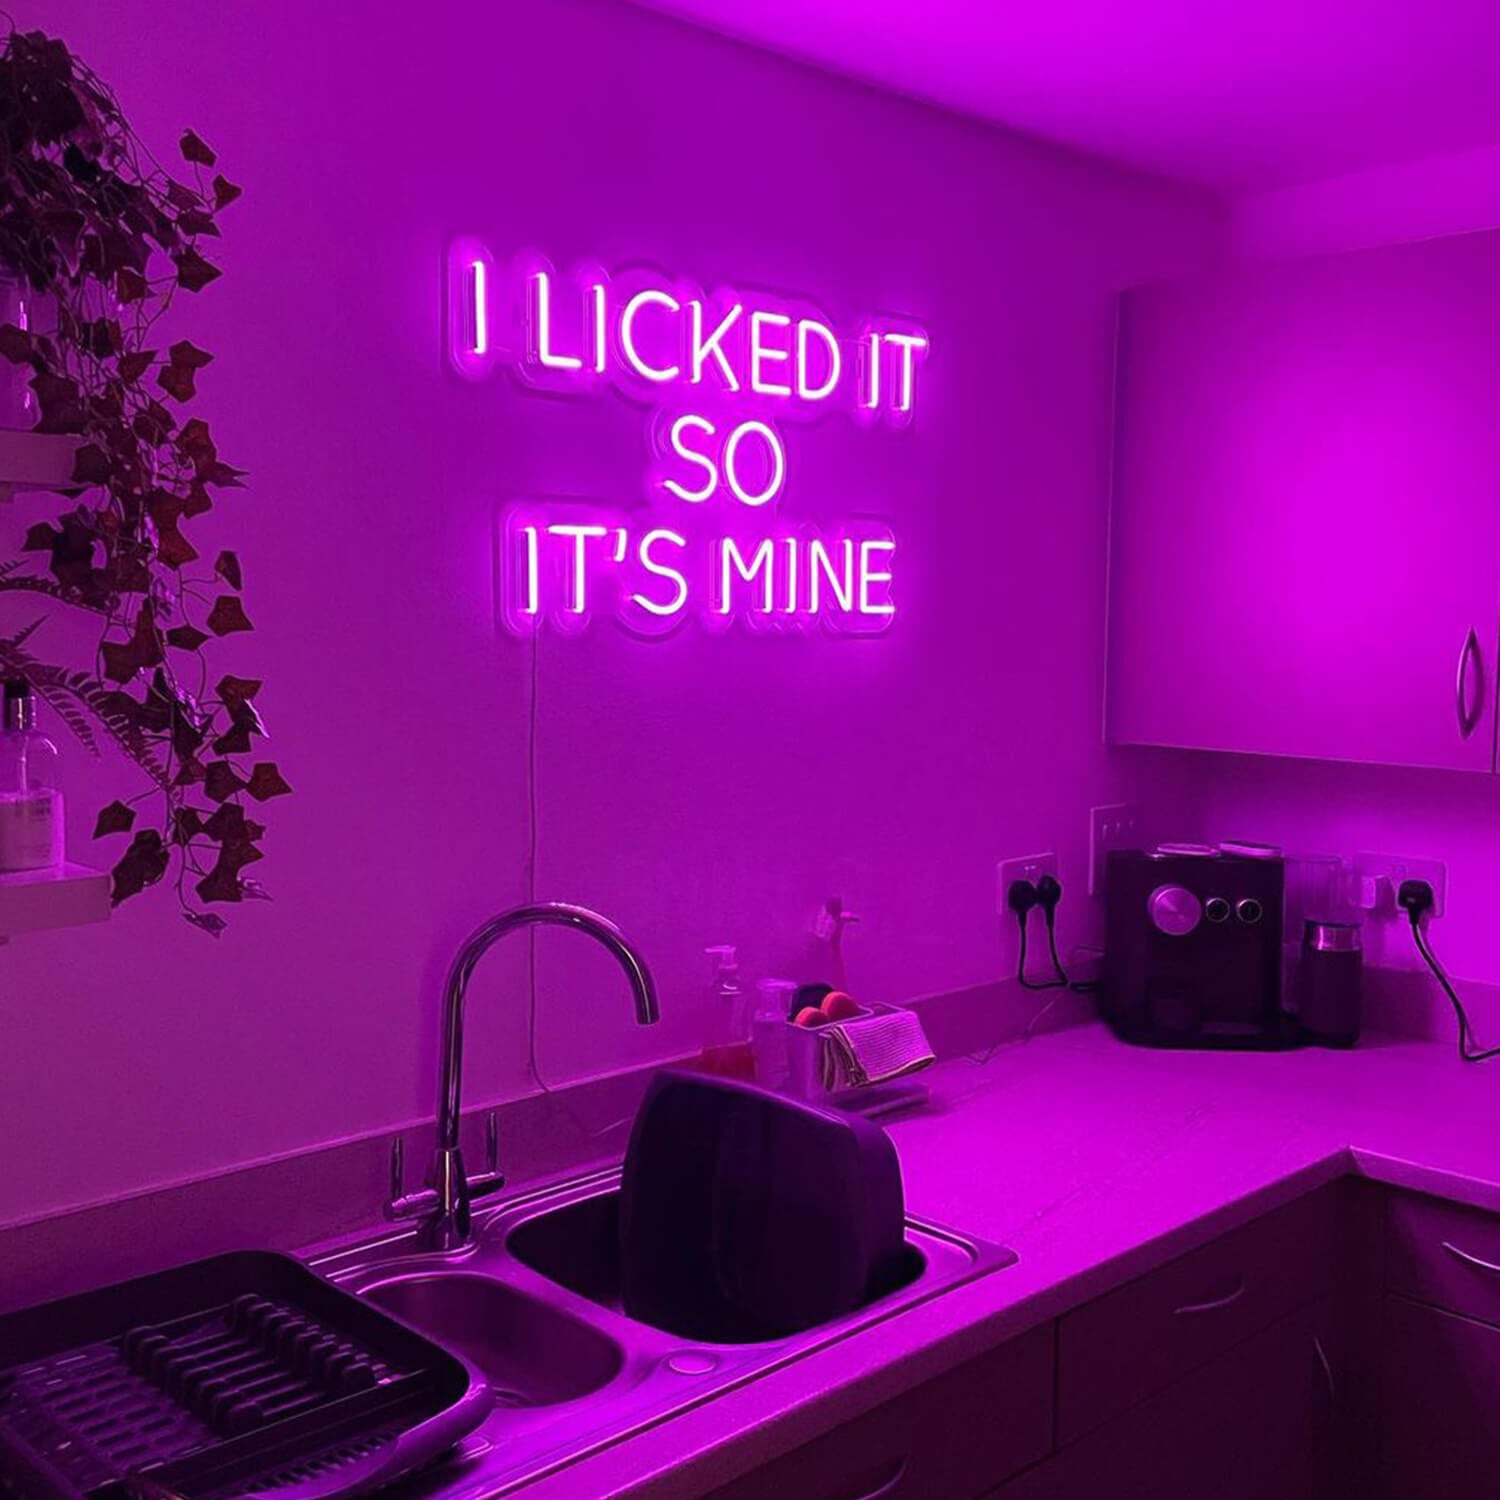 I licked it so its mine neon sign